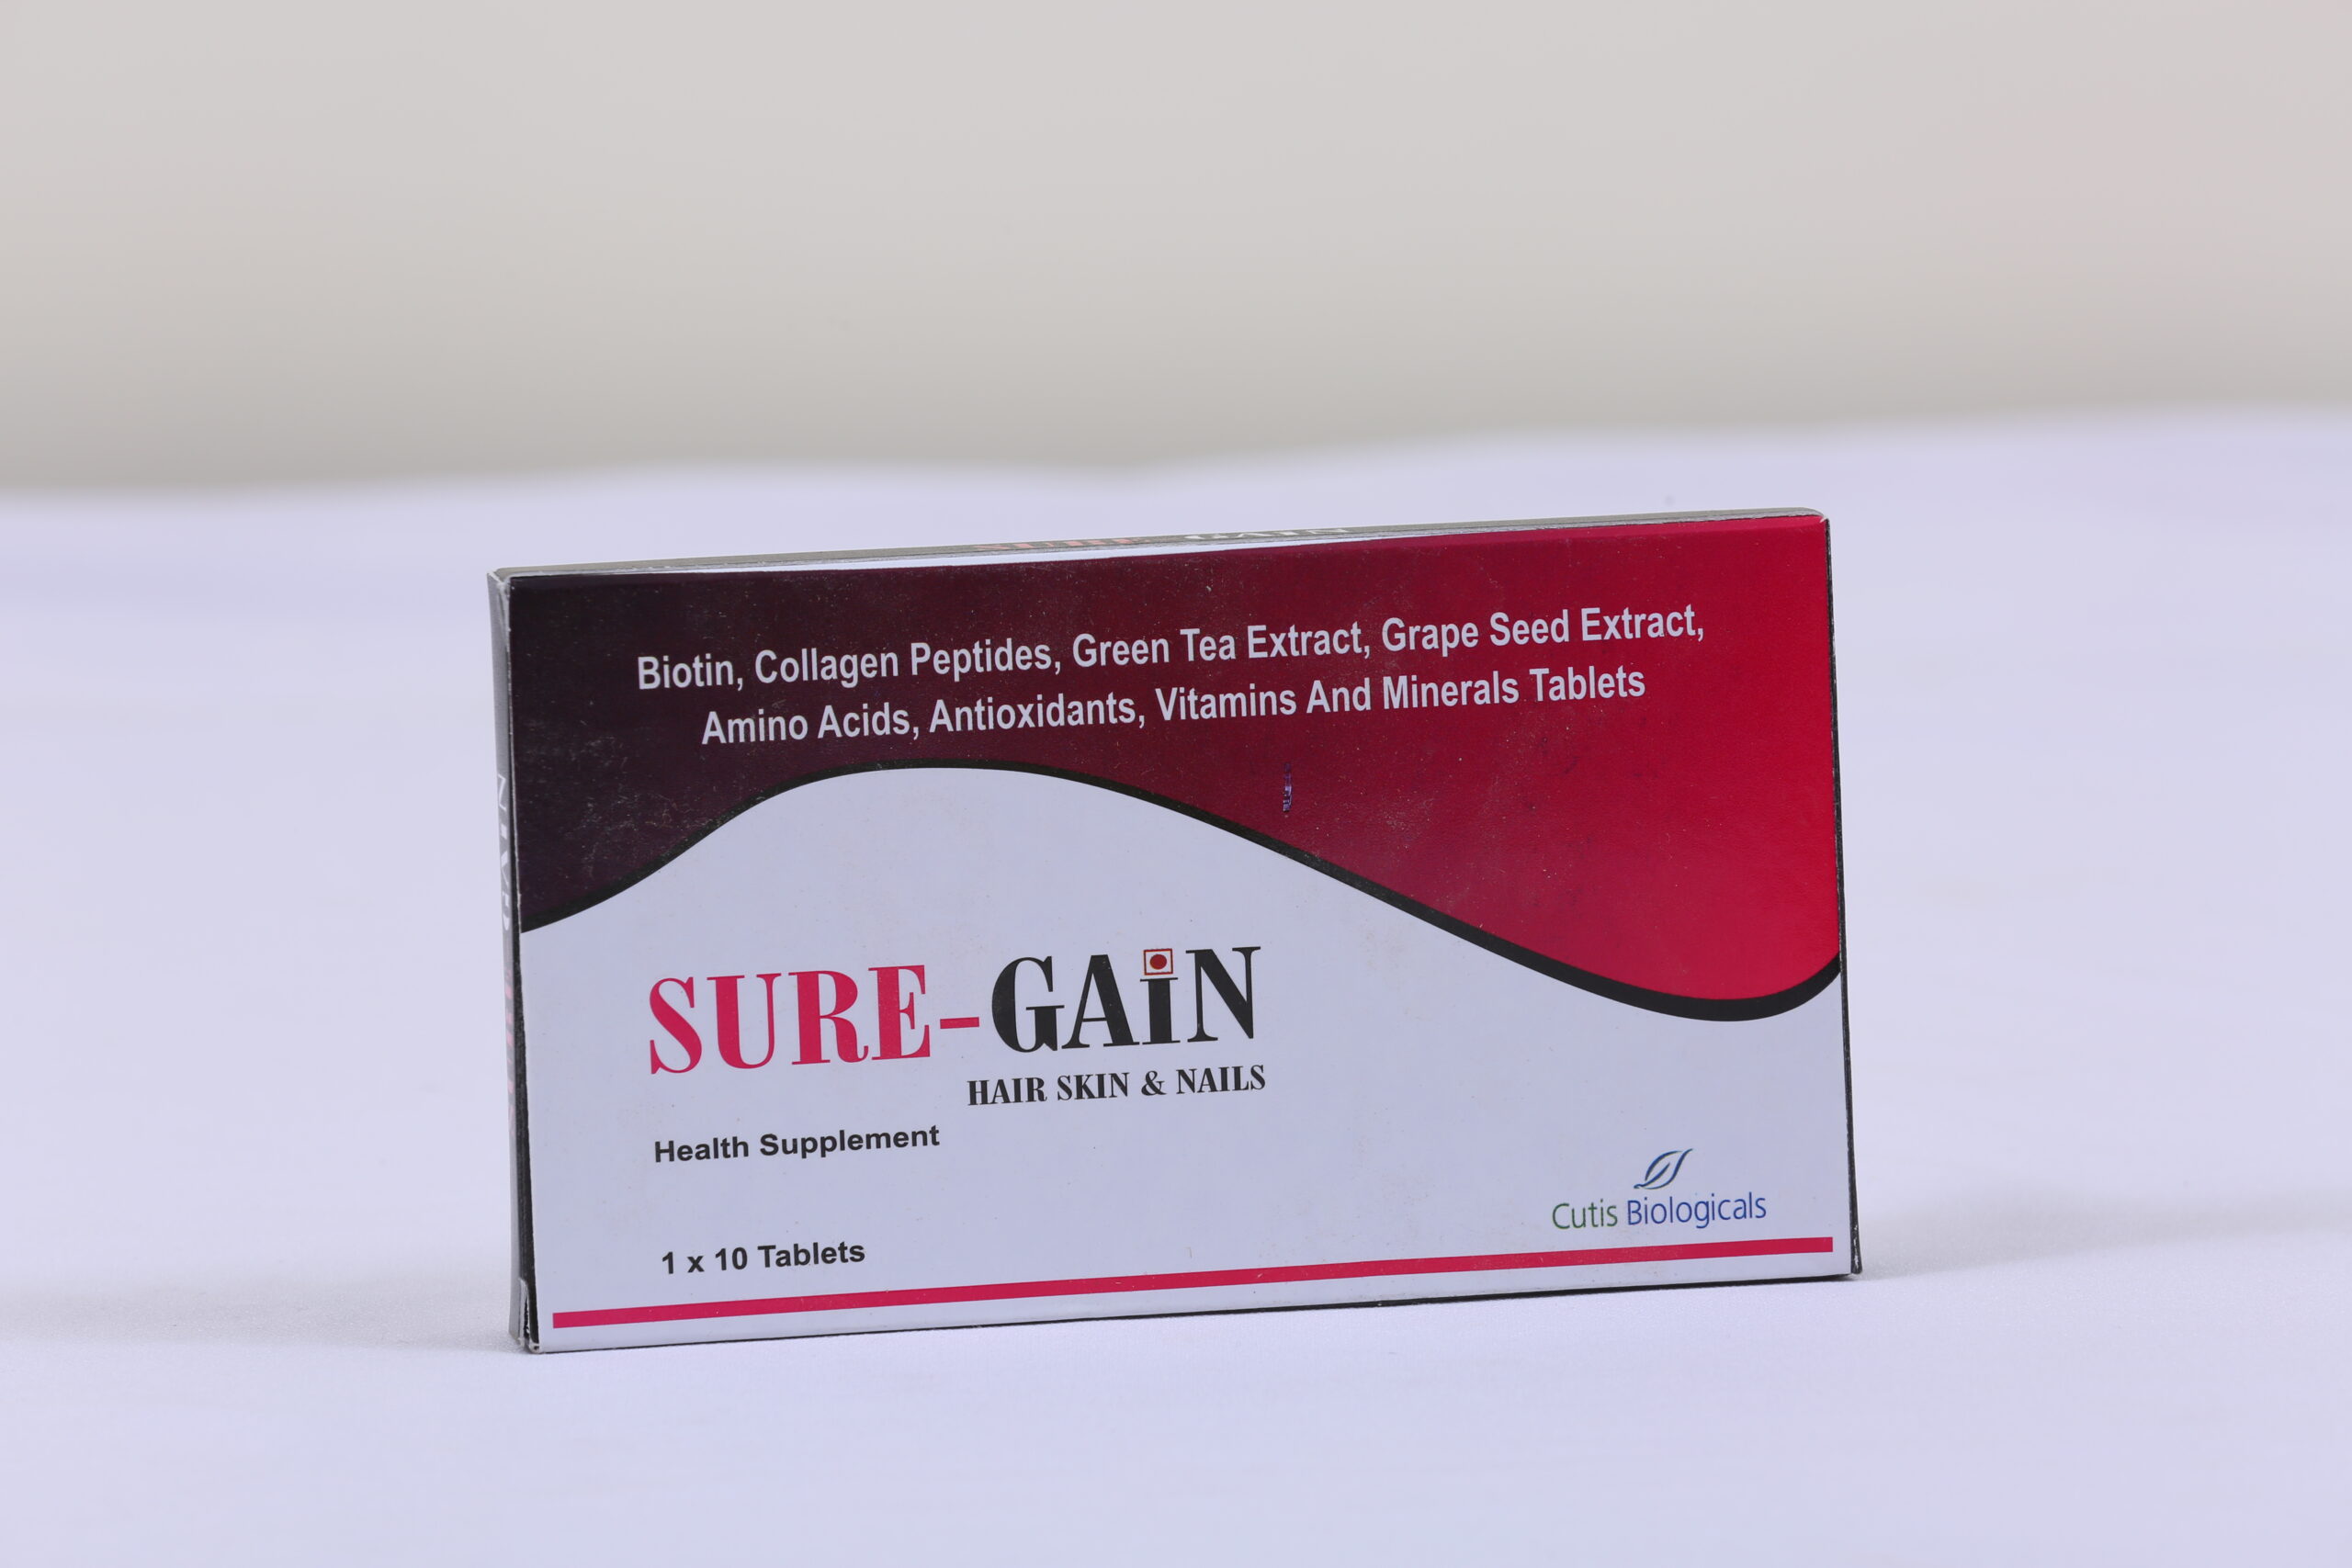 SURE-GAIN (Biotin, Collagen Peptides, Green Tea Extract, Grape Seed Extract, Amino Acids, Antioxidant, Vitamins and Minerals)